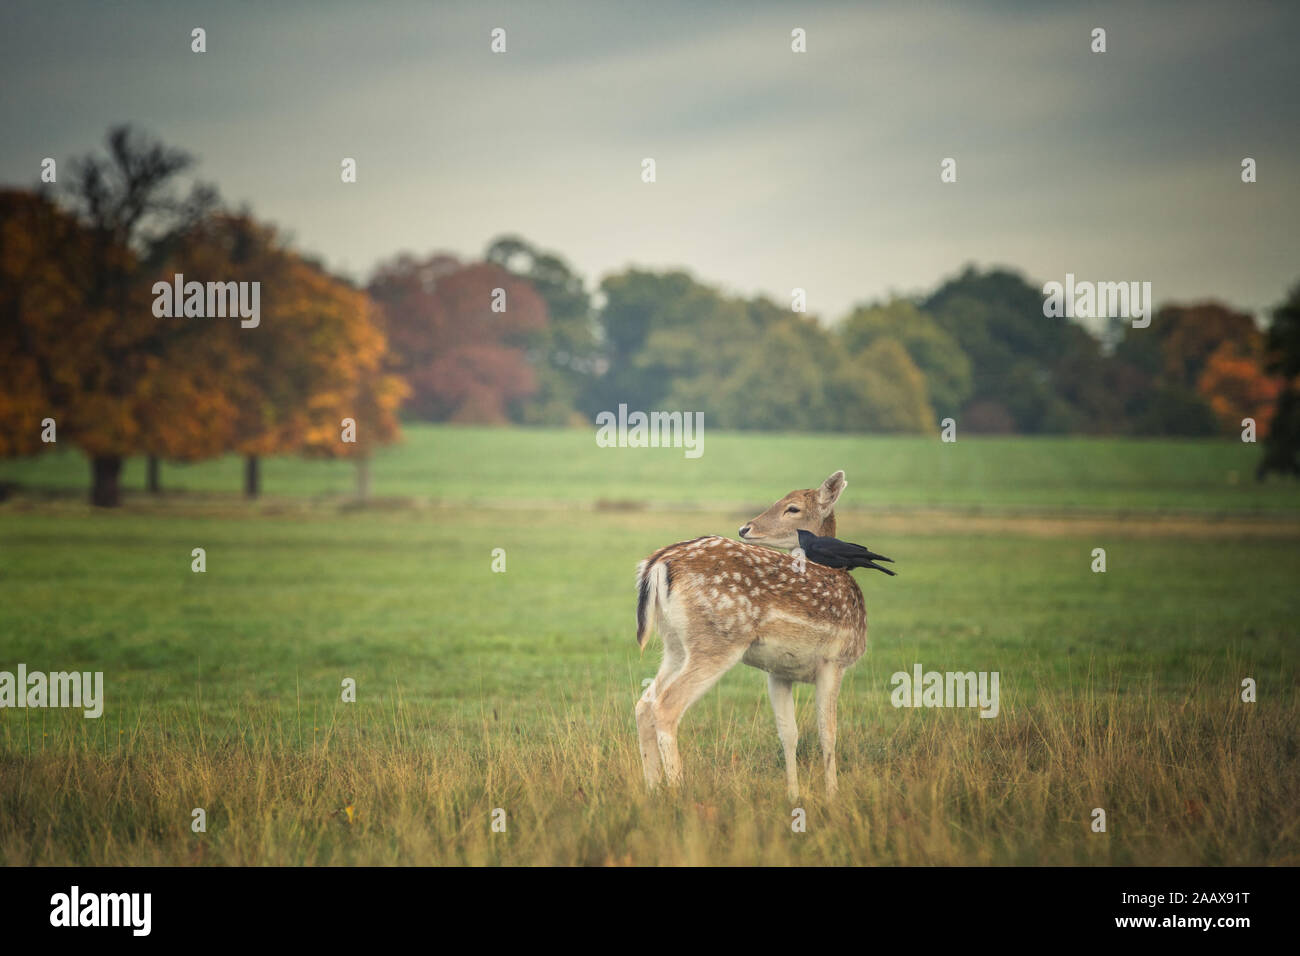 Deer and her black bird during the autumn in Richmond Park Stock Photo